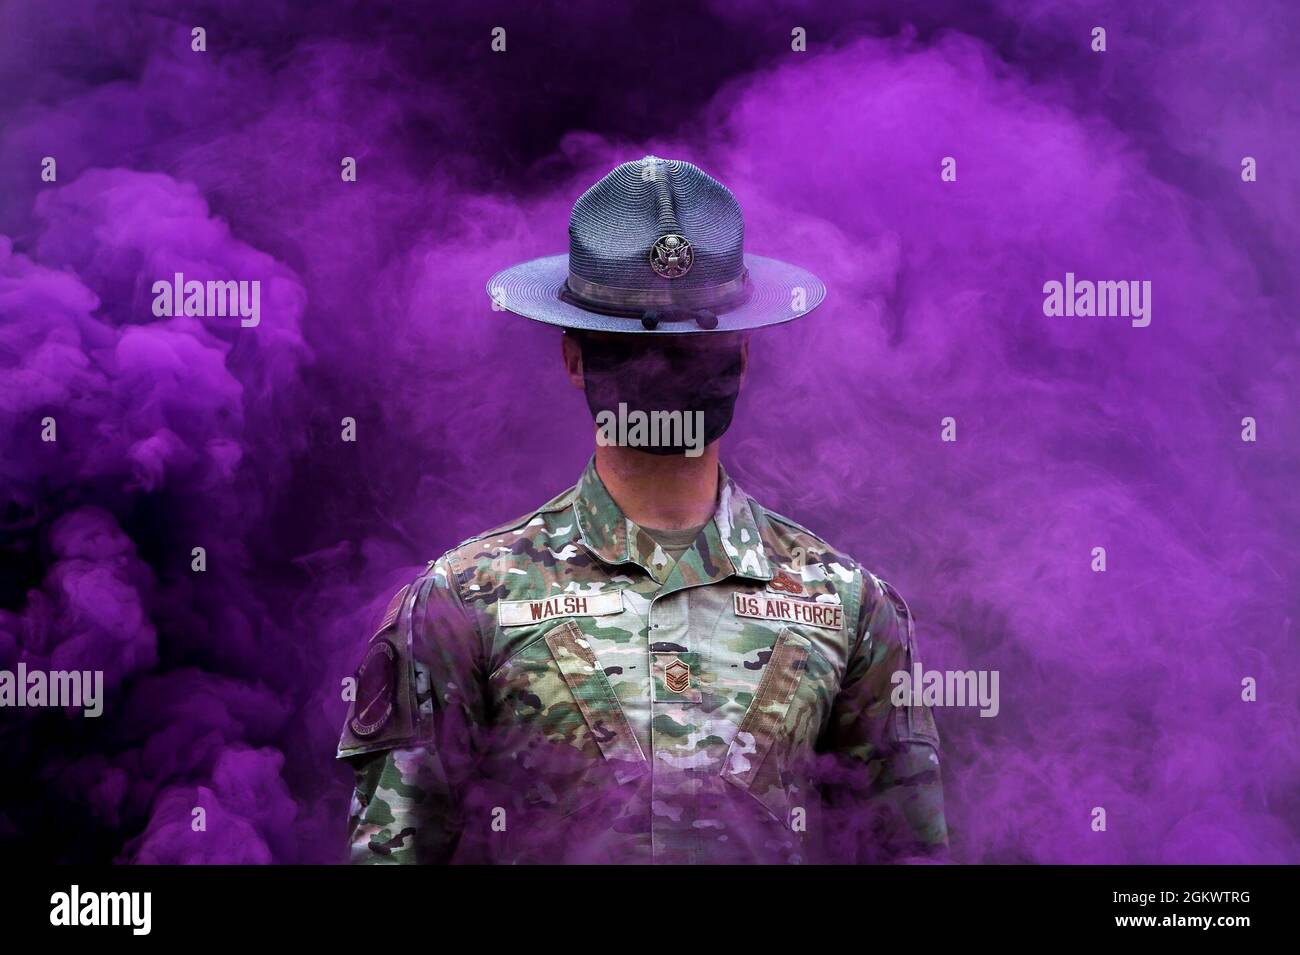 U.S. AIR FORCE ACADEMY, Colo. –  Military Training Instructor MSgt Michael Walsh, walks through purple smoke in the Basic Cadet Training assault course at the U.S. Air Force Academy's Jacks Valley in Colorado Springs, Colo., on July 13, 2021. Basic Cadet Training (BCT) is a six-week indoctrination program to guide the transformation of new cadets from being civilians to military academy cadets prepared to enter a four-year officer commissioning program. Stock Photo